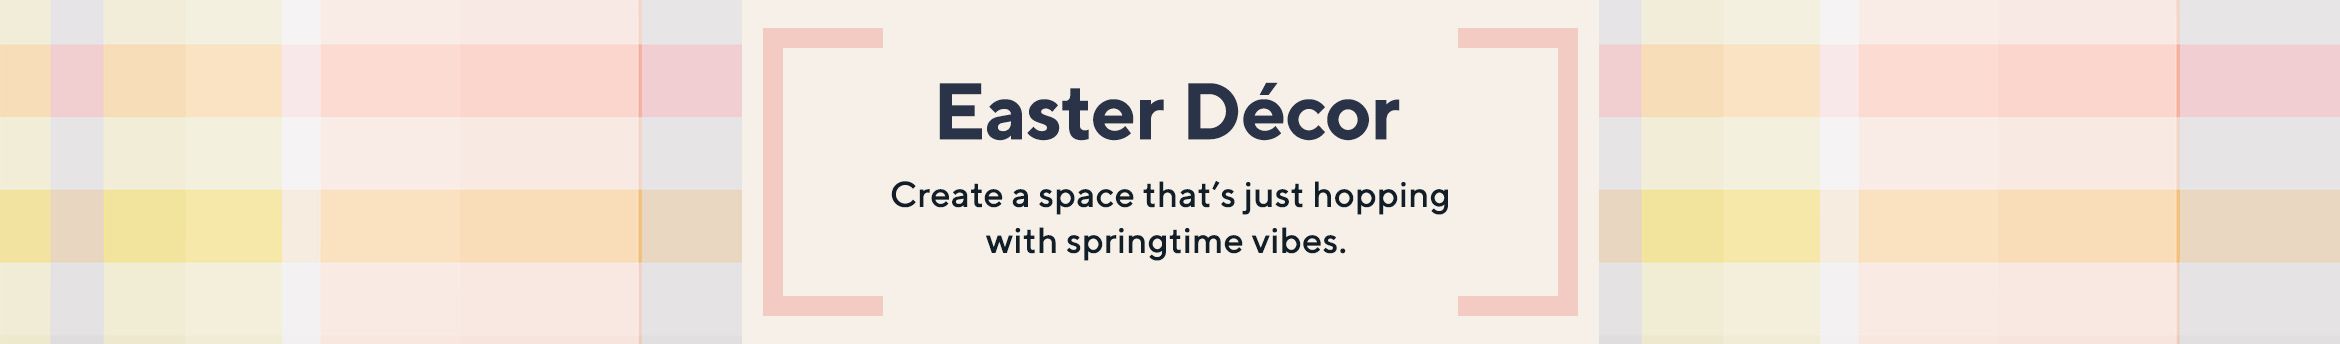 Easter Décor  Create a space that's just hopping with springtime vibes. 